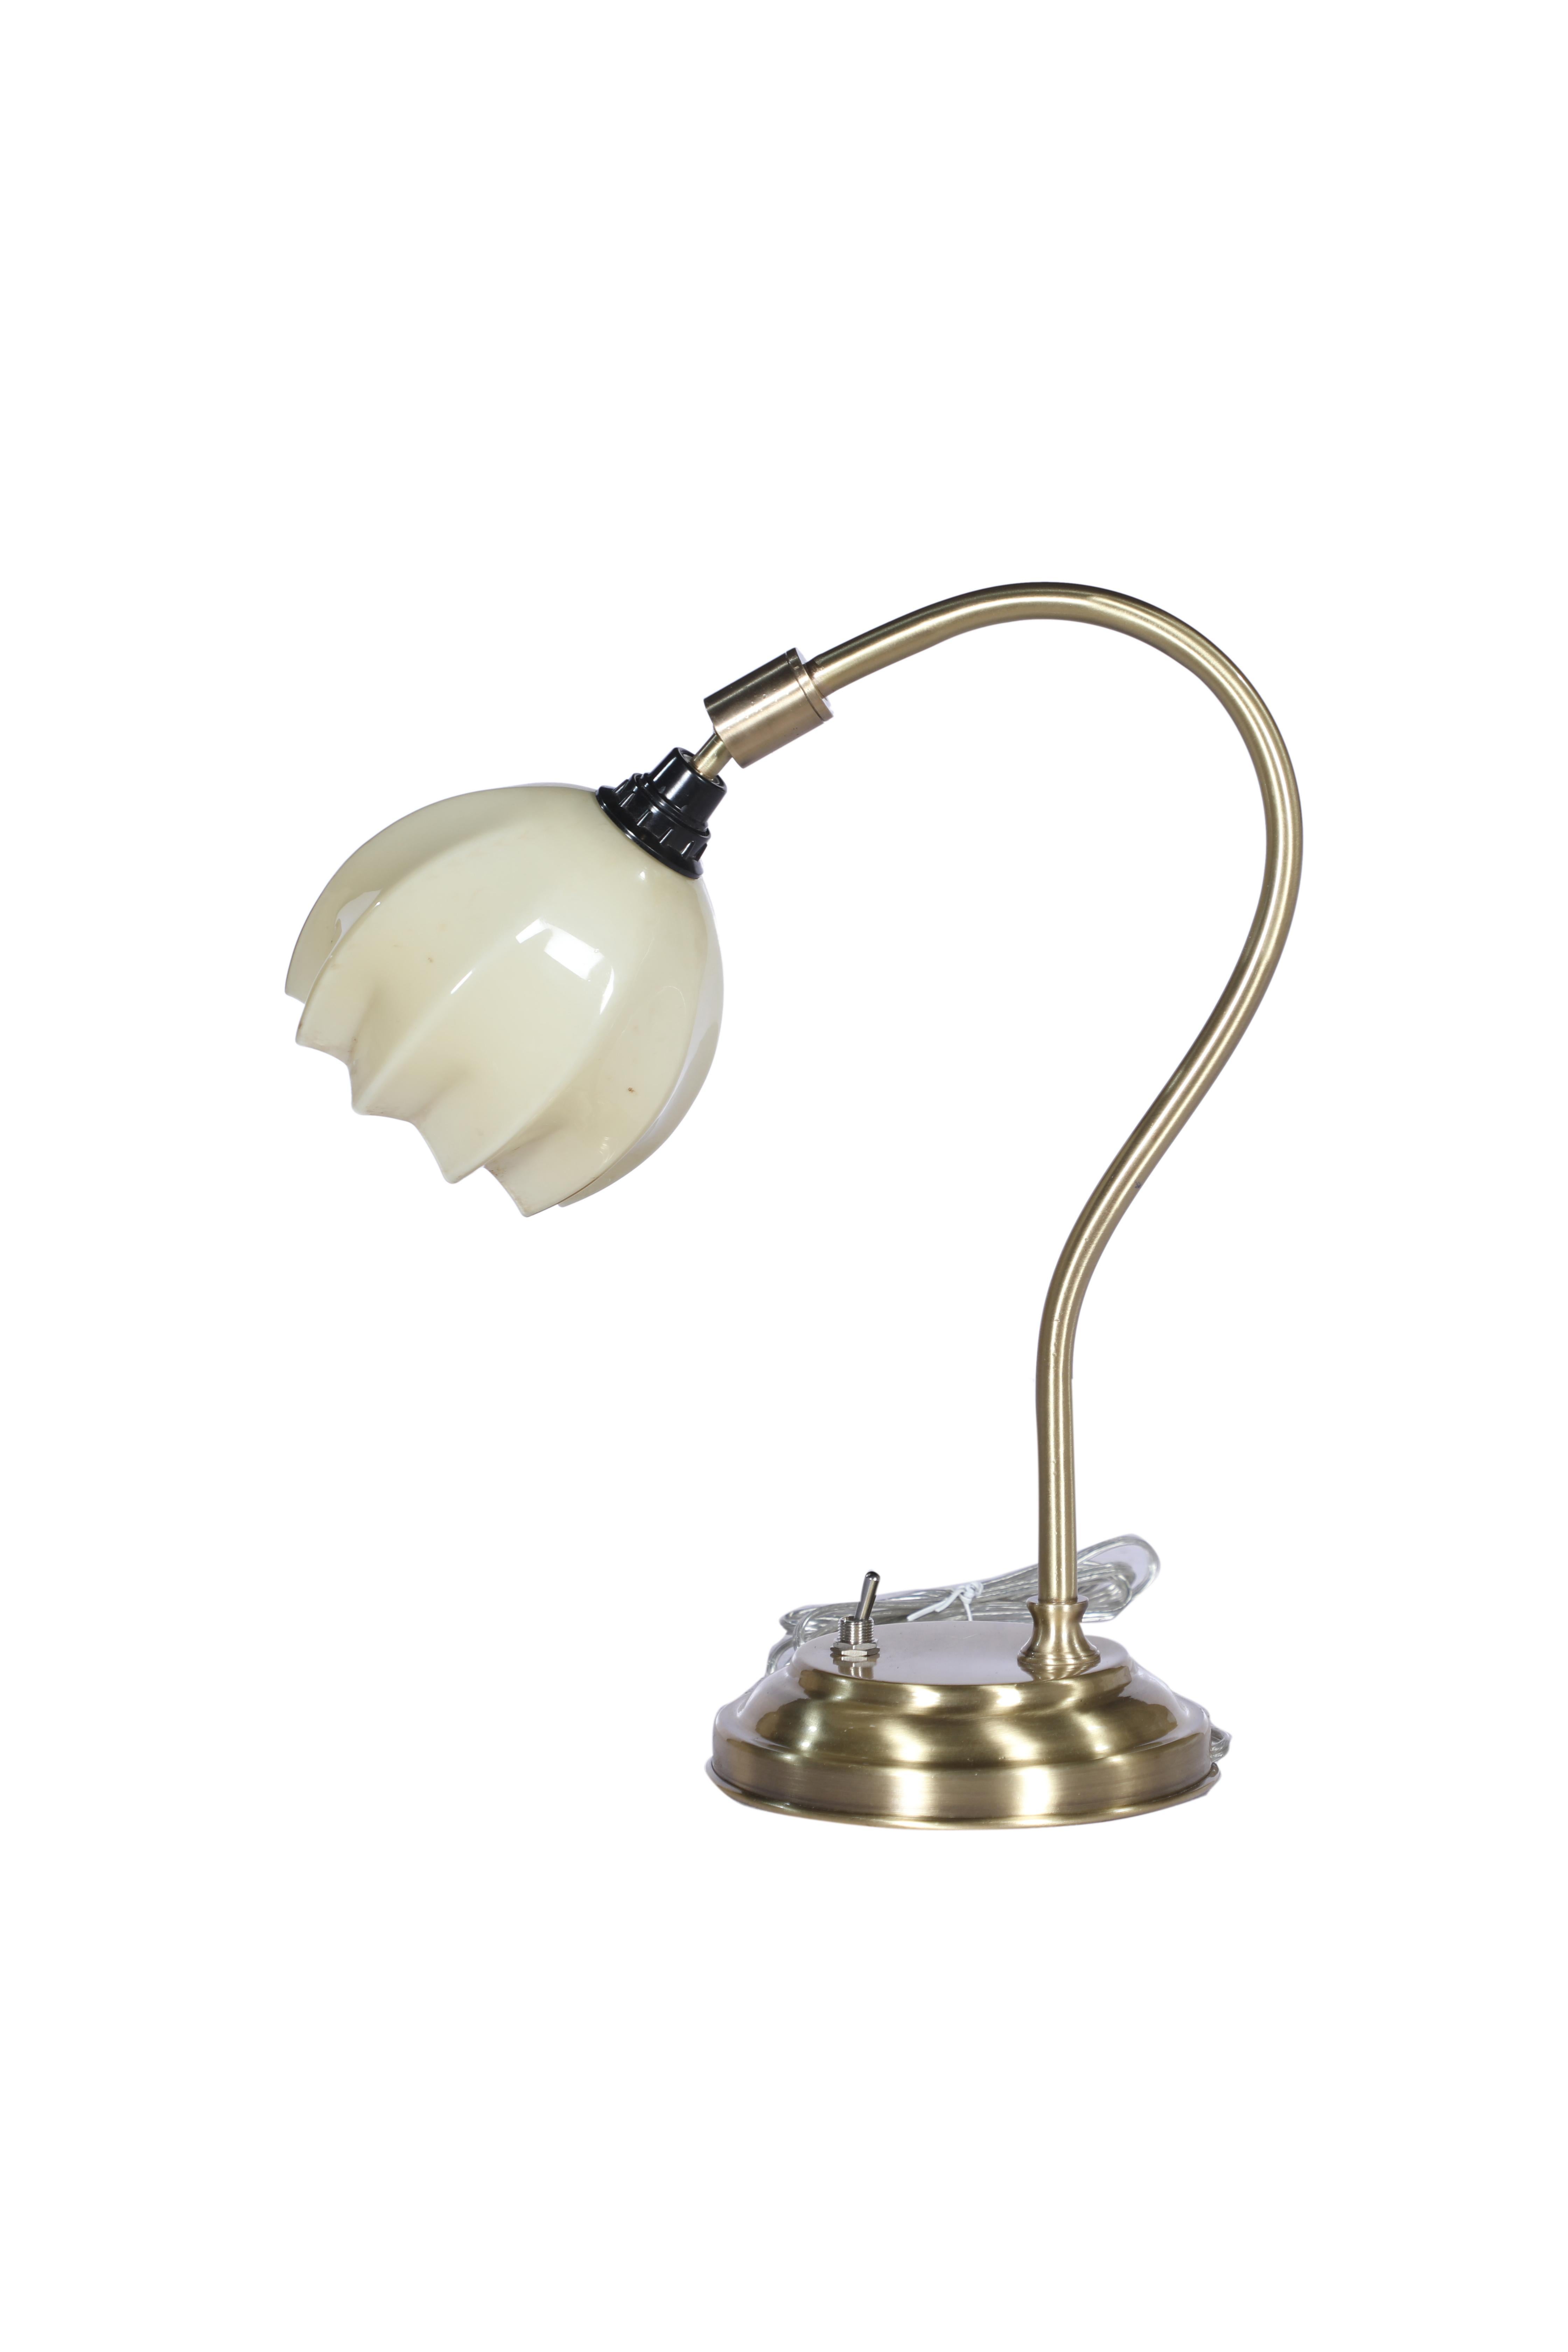 An Art Deco period table or desk light with an adjustable art glass shade in a flower motif. The shade itself is 5